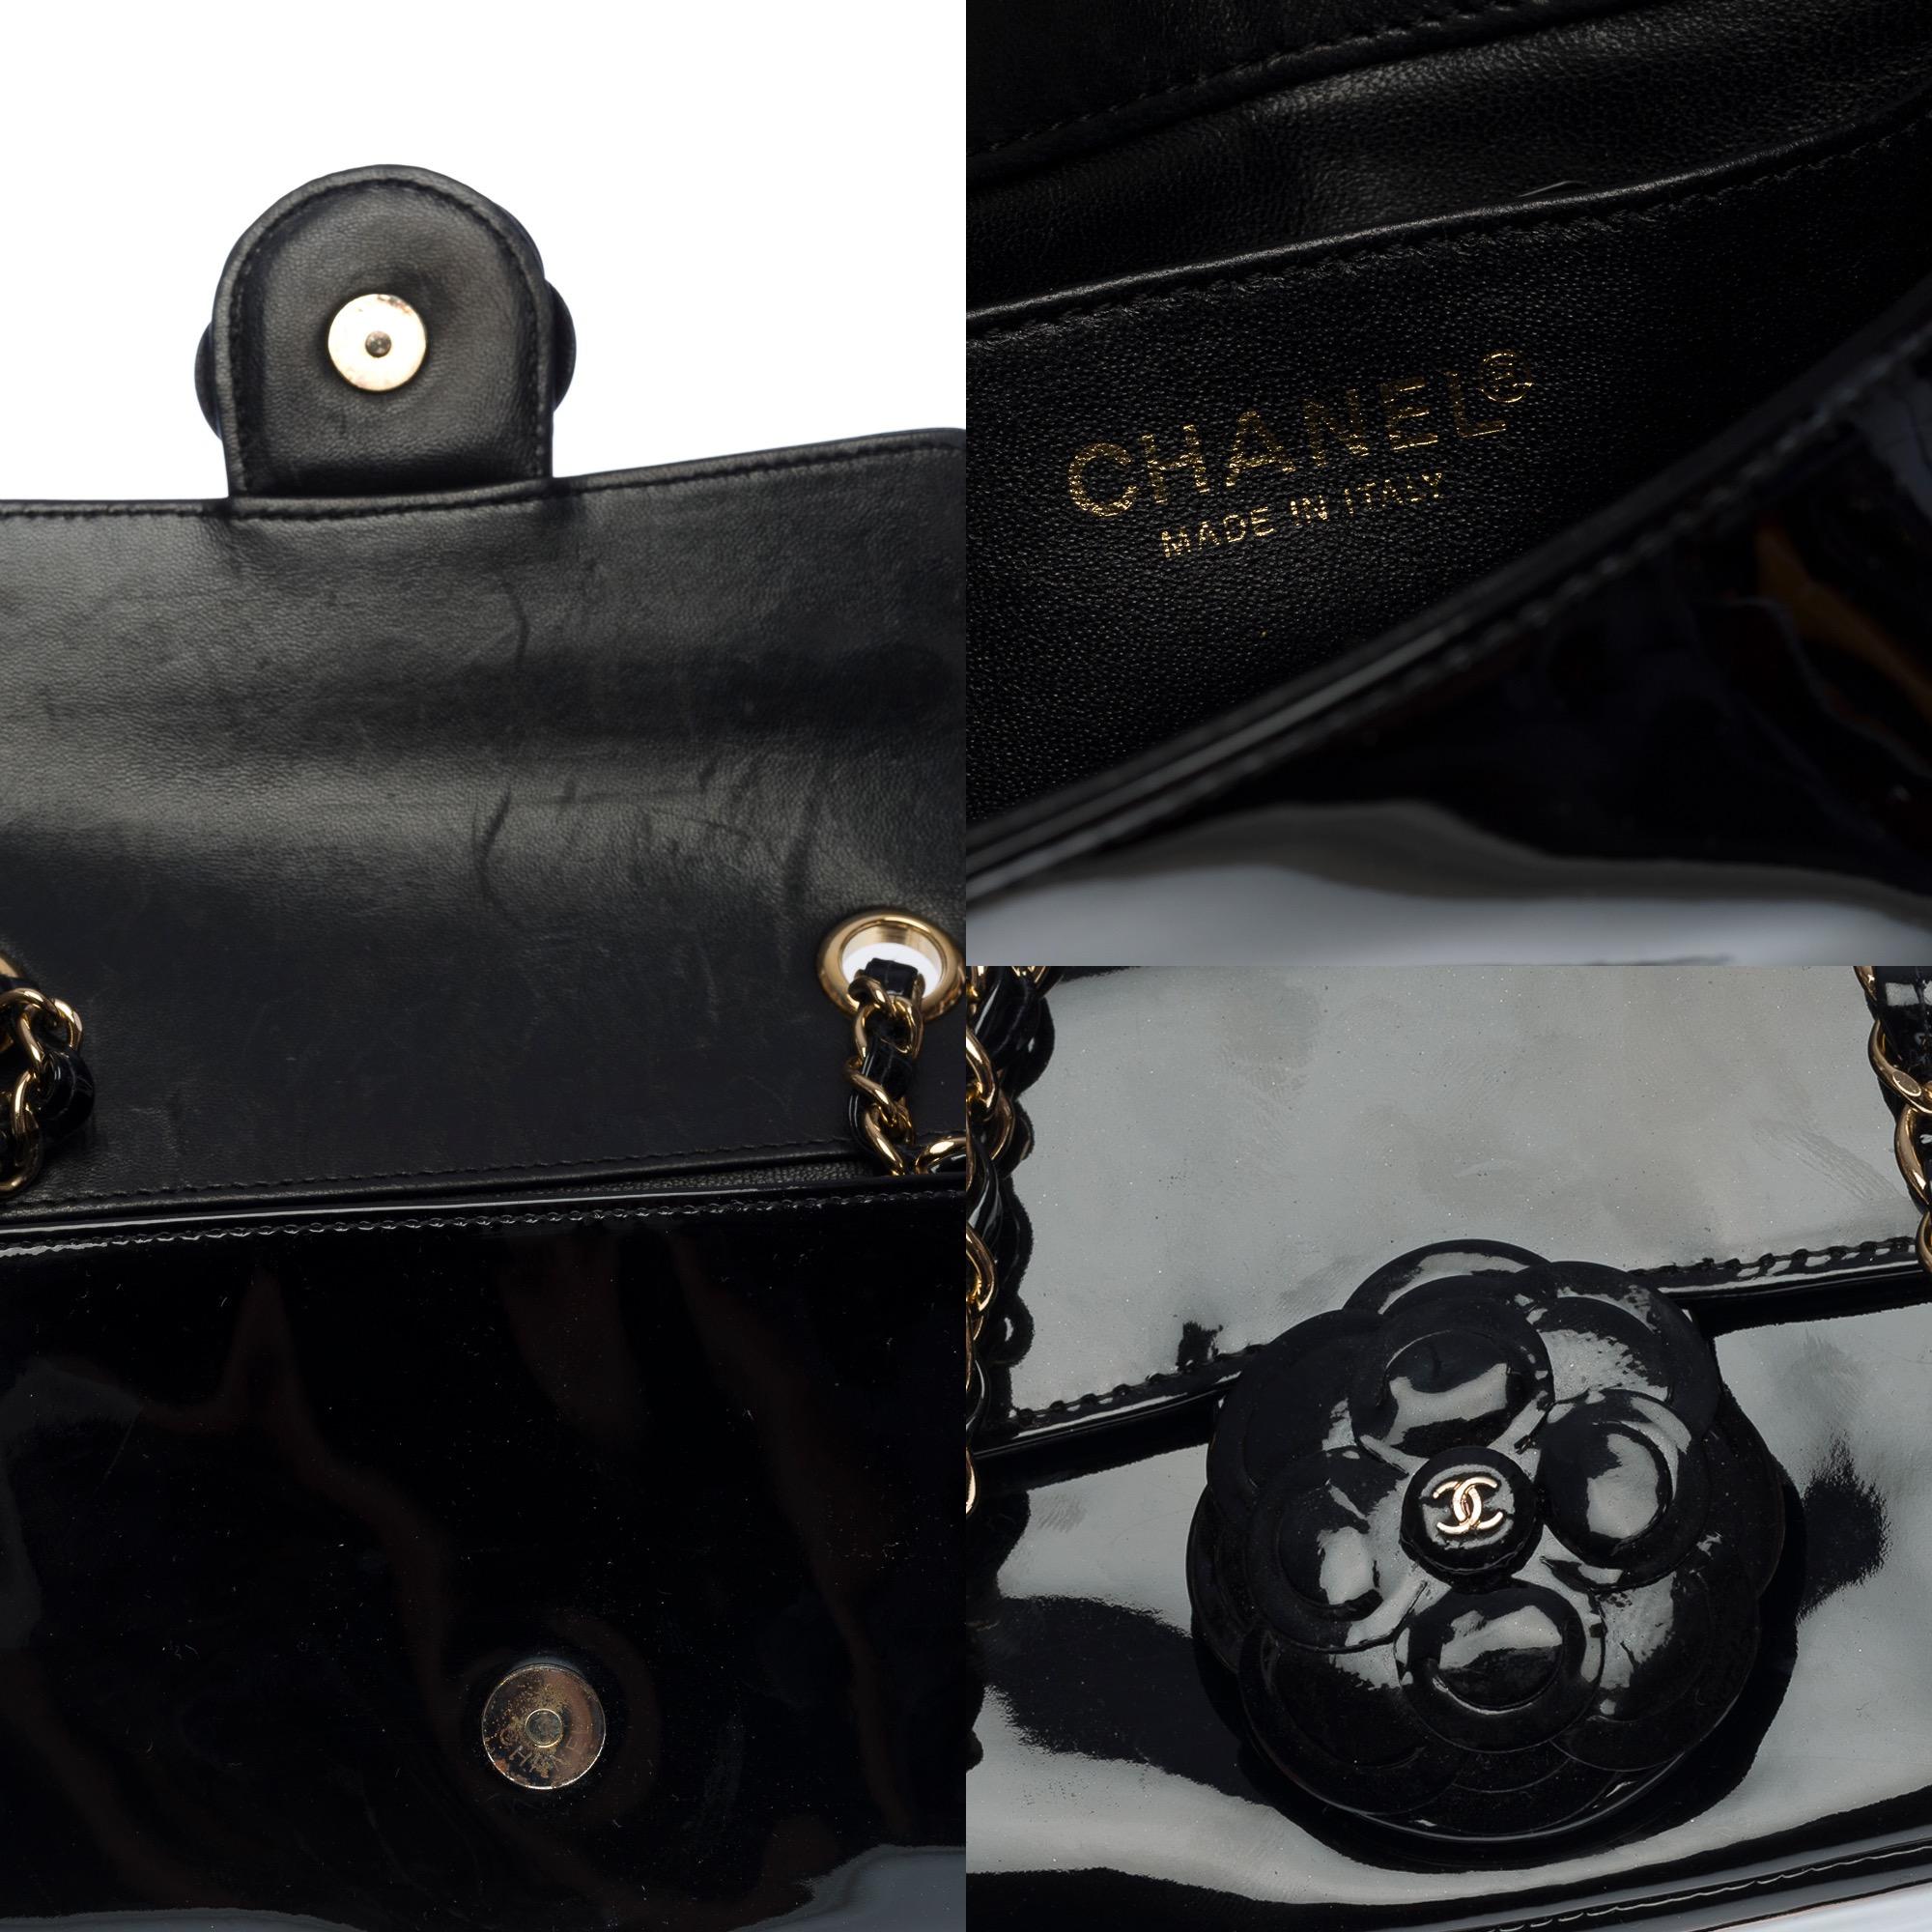 Rare Chanel Classic Timeless Camellia Mini flap bag in black patent leather, GHW 1